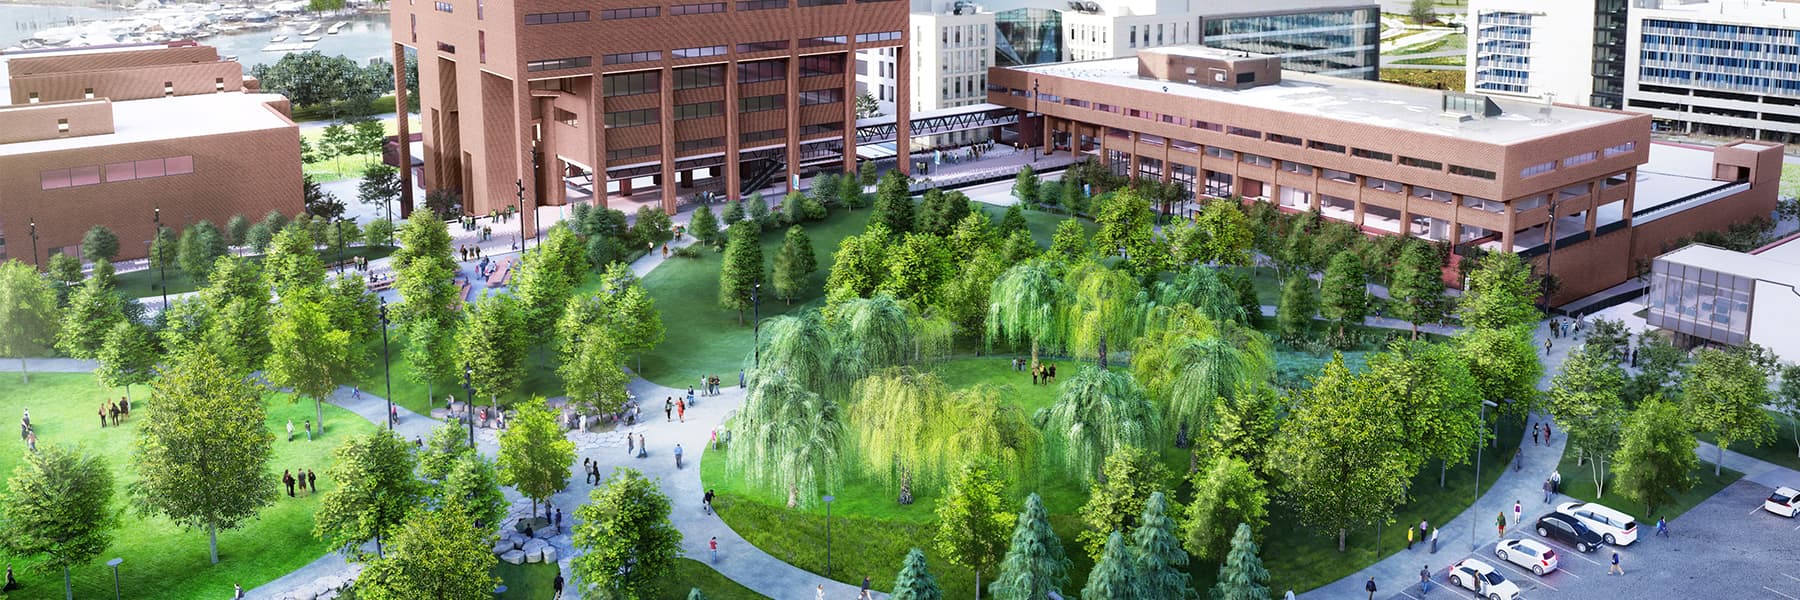 Campus Rendering aerial view showing new quad with greenery.